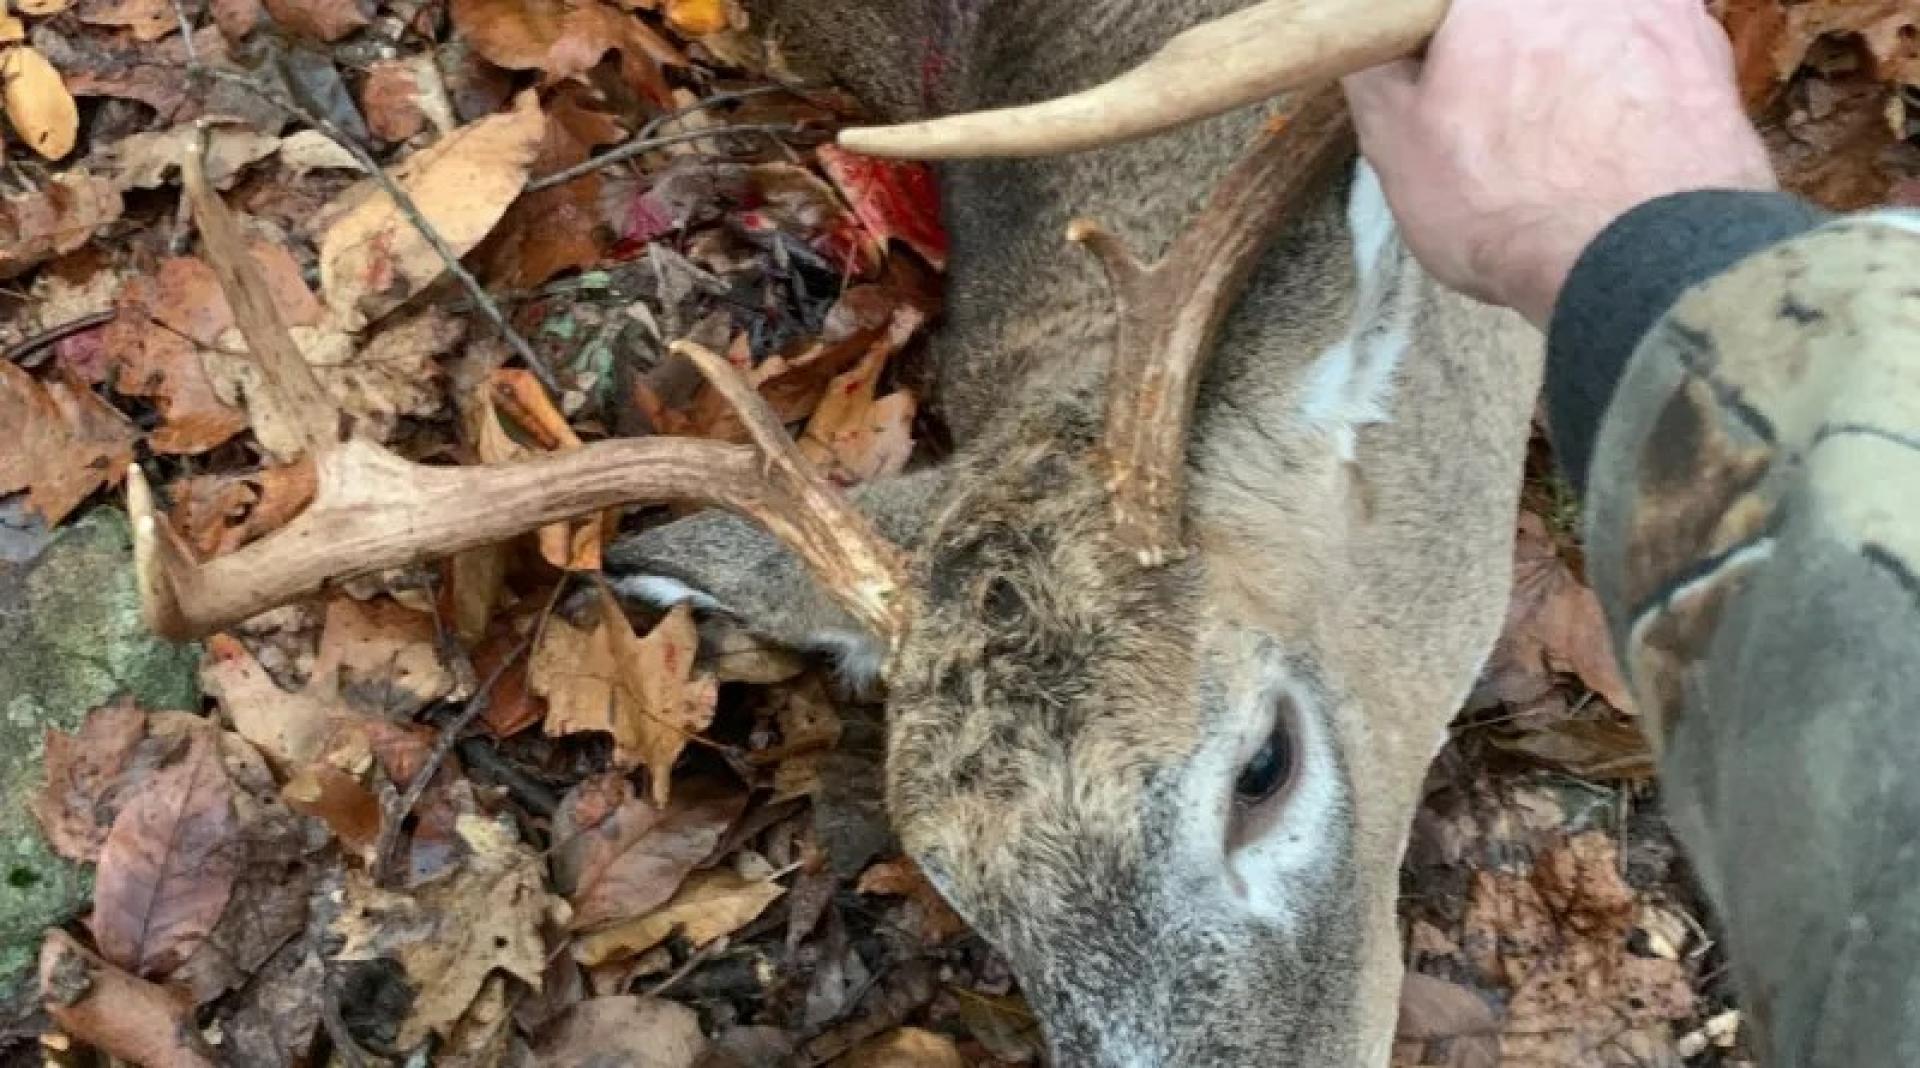 If You’re A Whitetail Hunter, Now is the Time to Get in the Woods